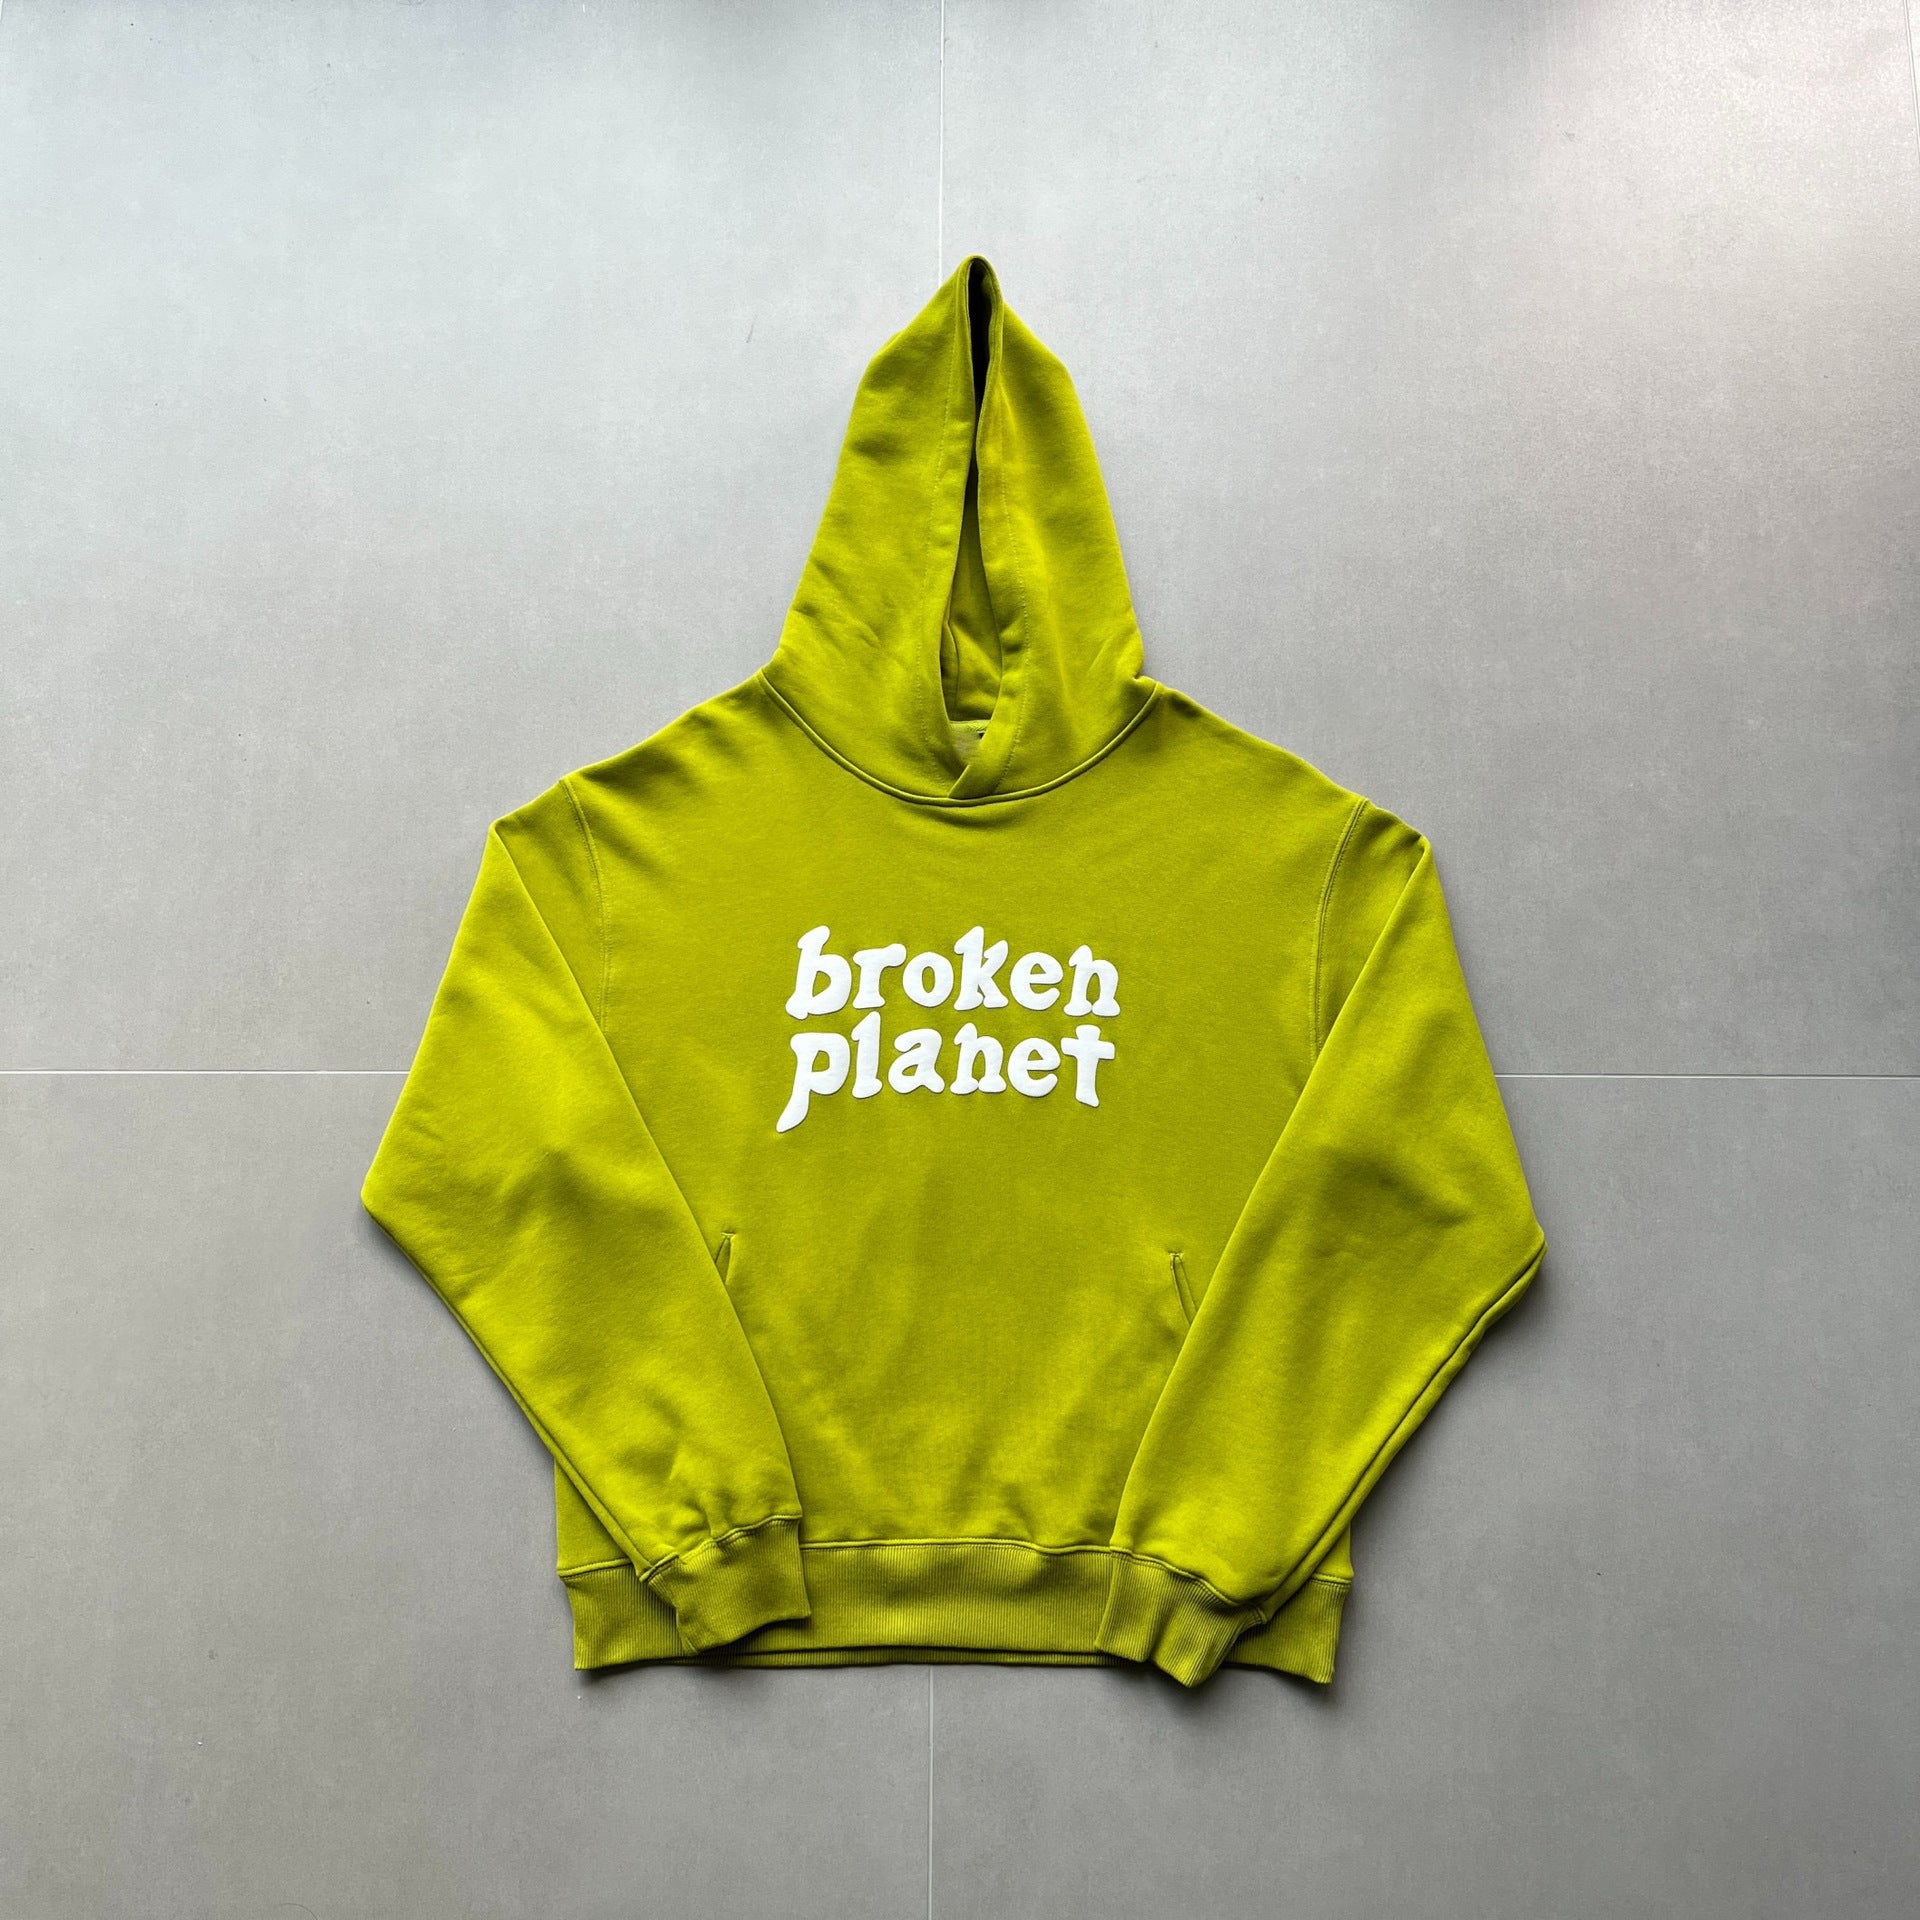 A lime green, polyester hoodie with "broken planet" printed in white text on the front, laid out flat on a grey tiled floor. This street hipster style Maramalive™ Letter Foam Printed Hoodie Punk Rock Casual Sweater is perfect for making a statement.